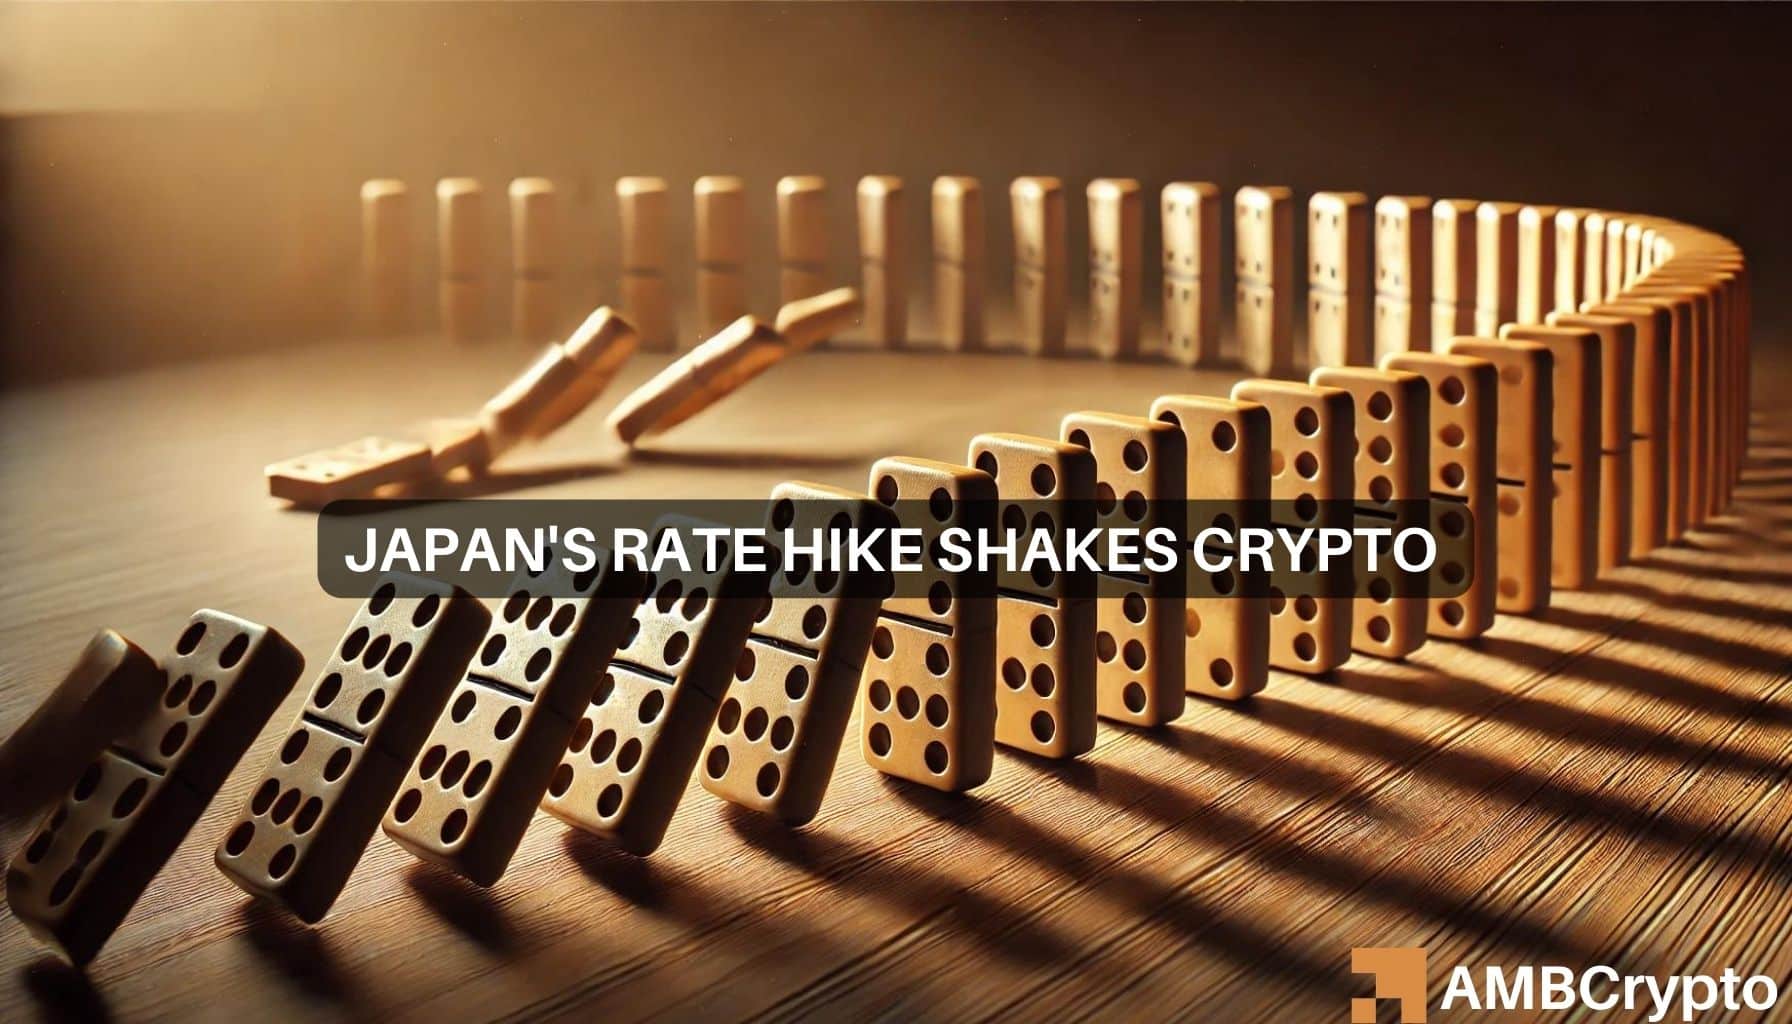 Japan’s rate hike and the crypto crash: What you need to know